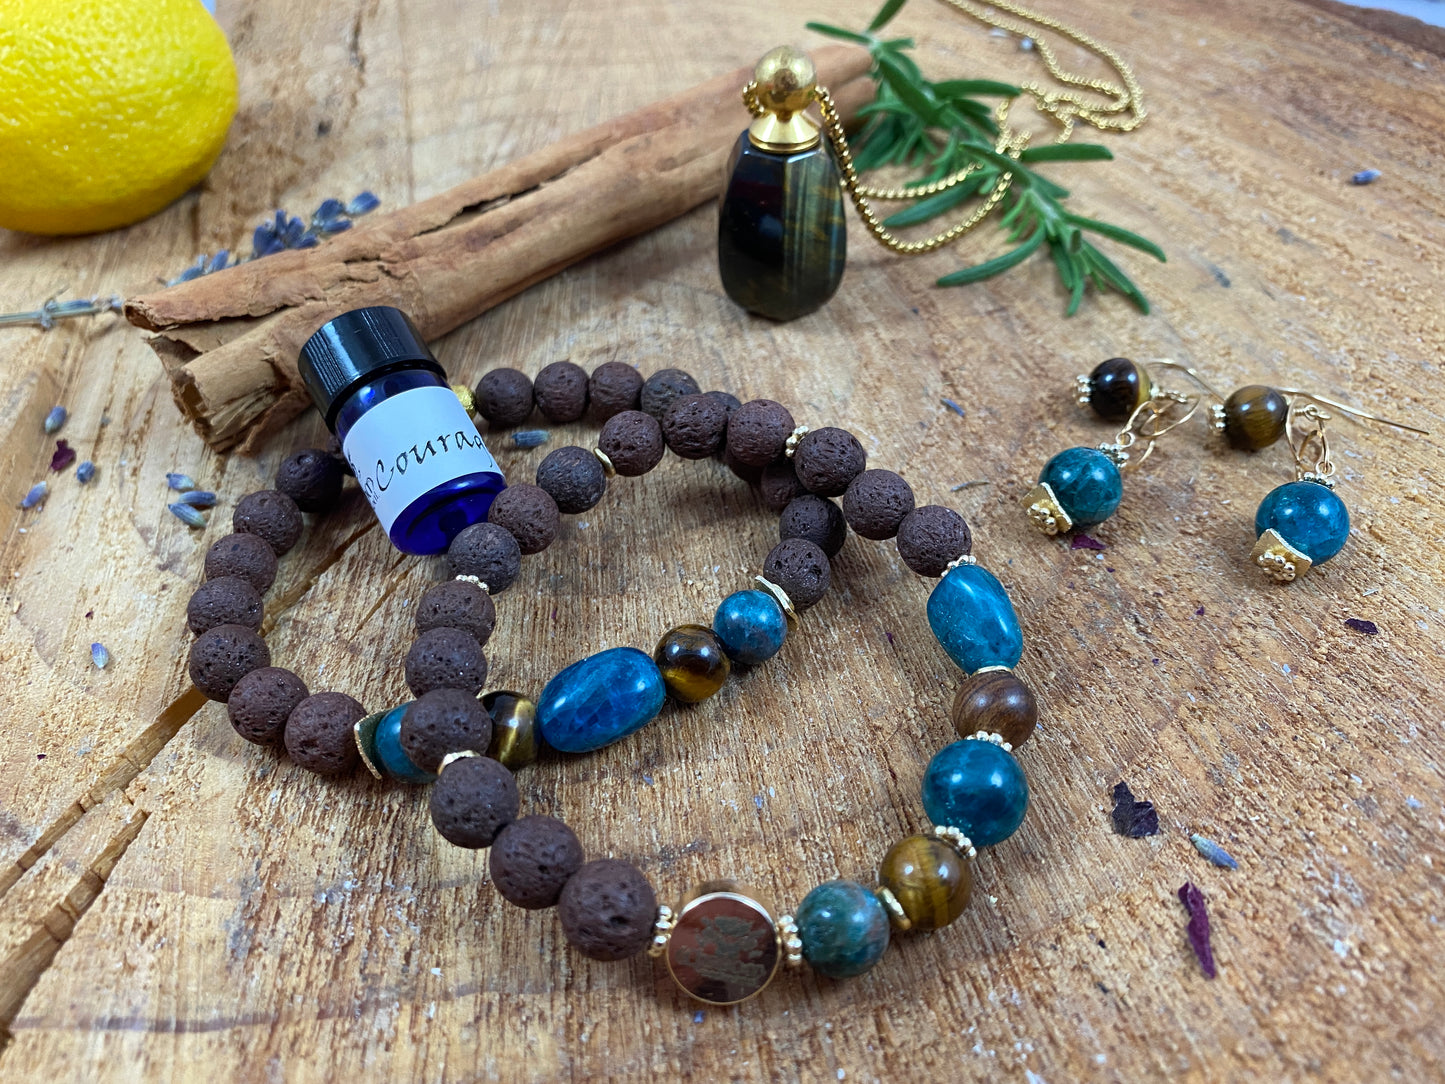 Courage Set- necklace, bracelets, Earrings and Essential oil Blend